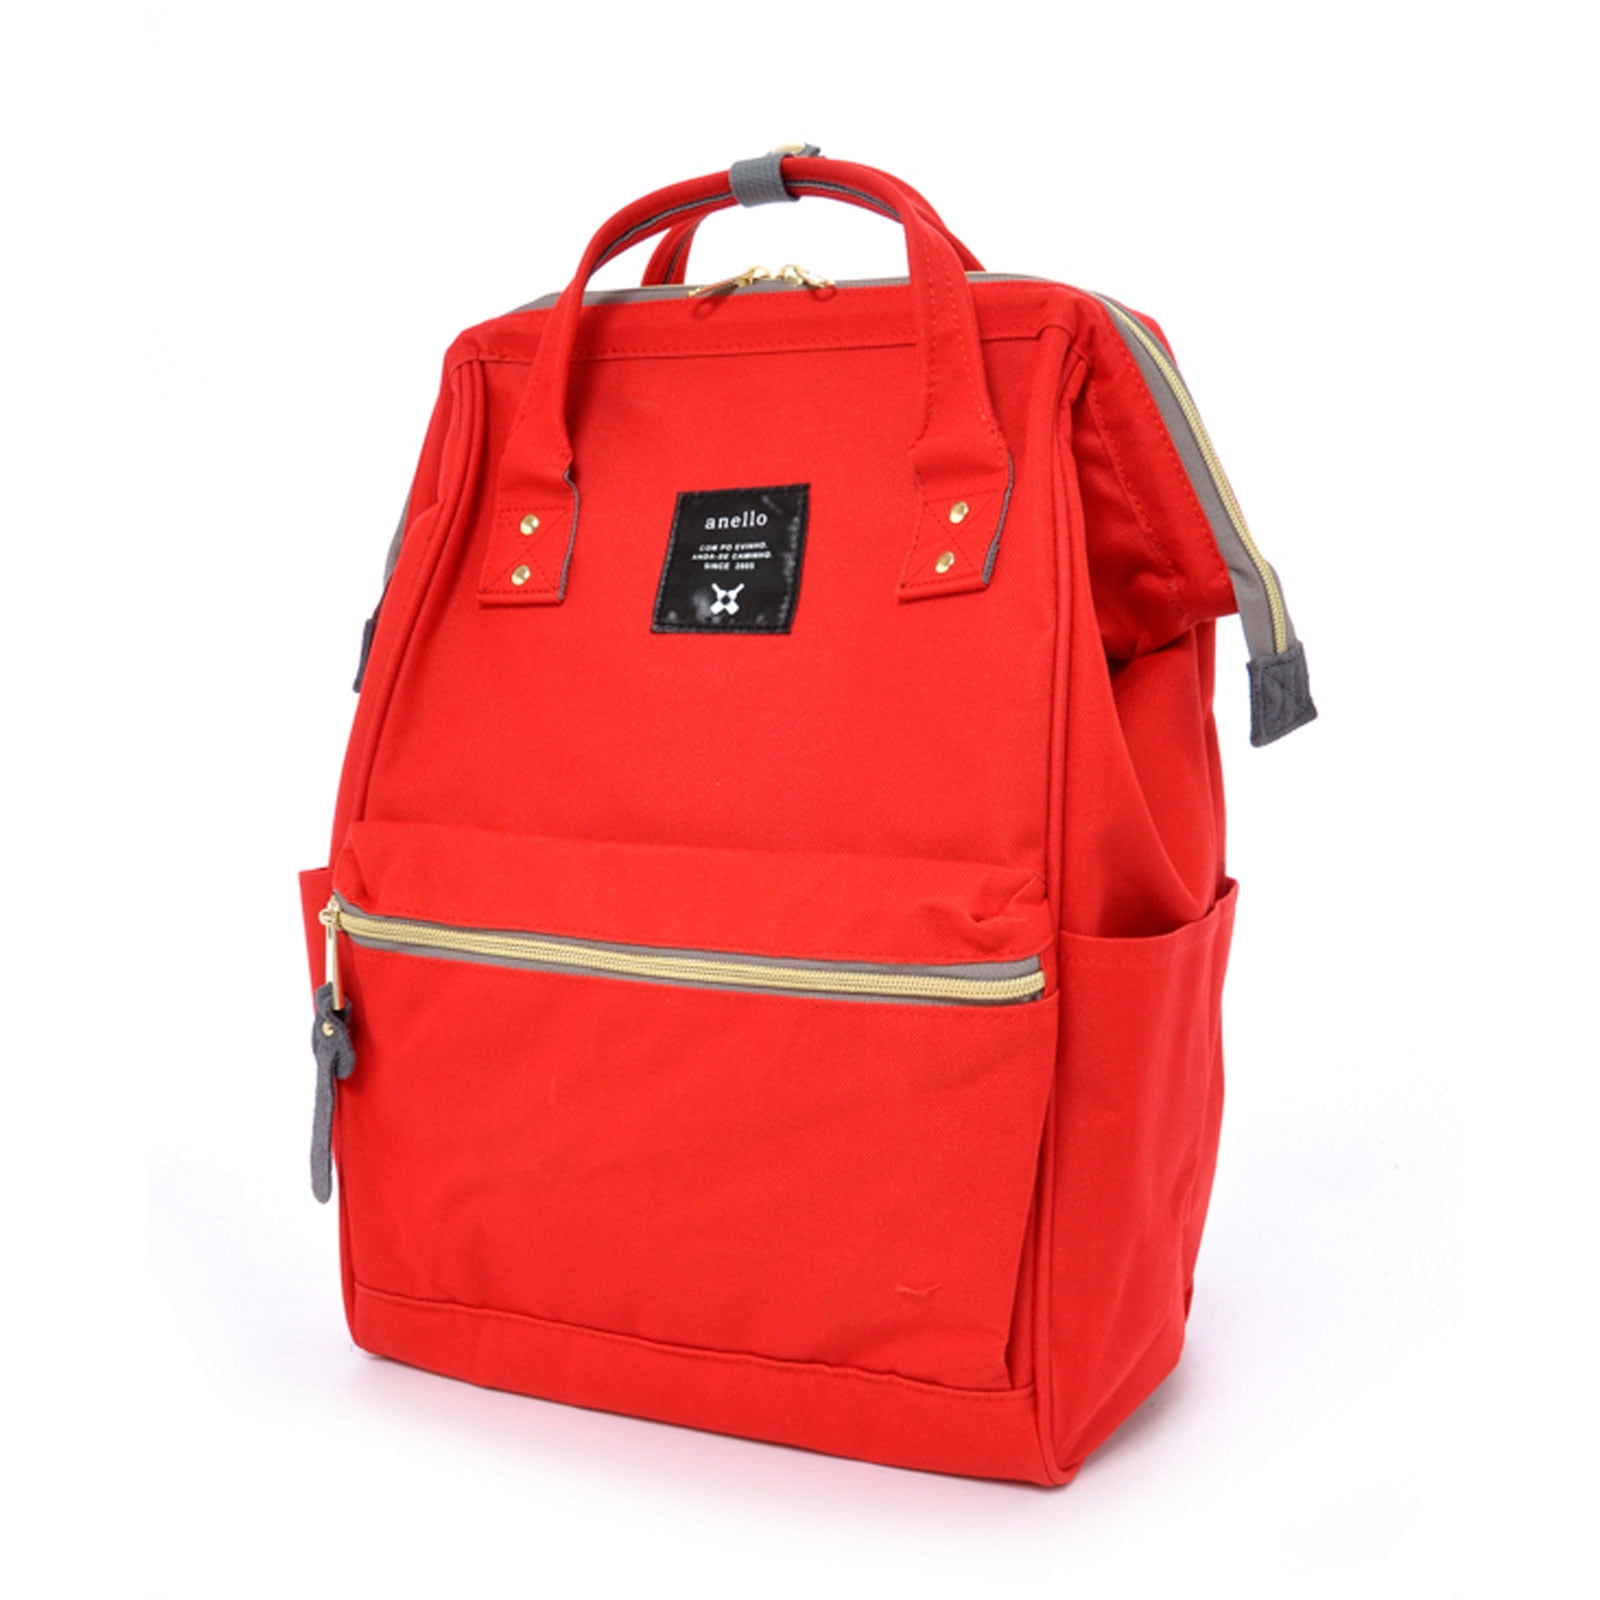 Anello Official Japan Red Unisex Fashion Backpack Rucksack Diaper Travel  Bag AT-B0193A-RE